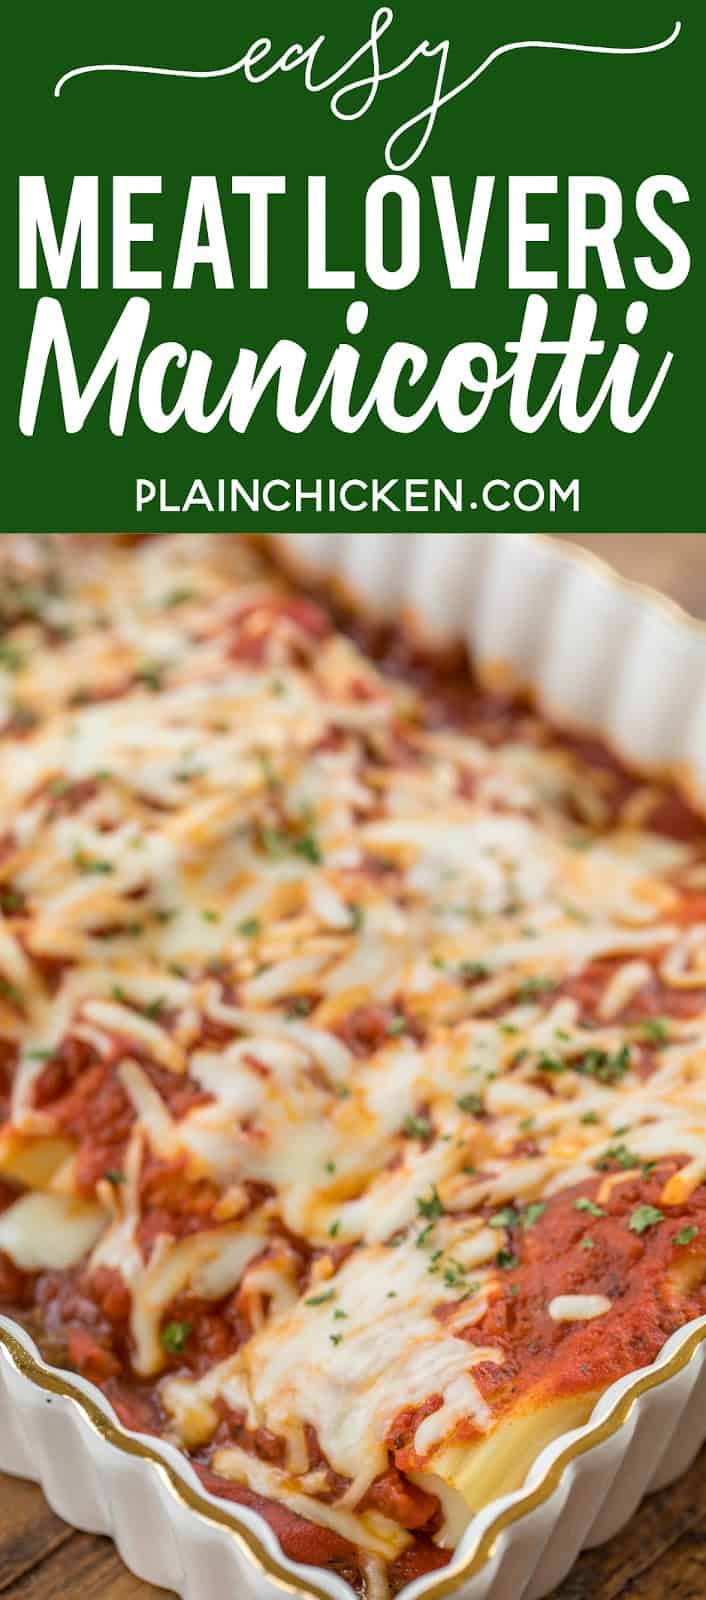 Easy Meat Lovers Manicotti Recipe - manicotti stuffed with cheese, ham and pepperoni and baked in a quick meat sauce. Super easy and DELICIOUS stuffed pasta casserole. Use string cheese to easily stuff cooked manicotti noodles. Can make ahead and refrigerate or freeze for later. All you need is a salad and some garlic bread for a quick weeknight meal!! #casserole #manicotti #pastacasserole #bakedpasta #freezermeal #makeaheadmeal